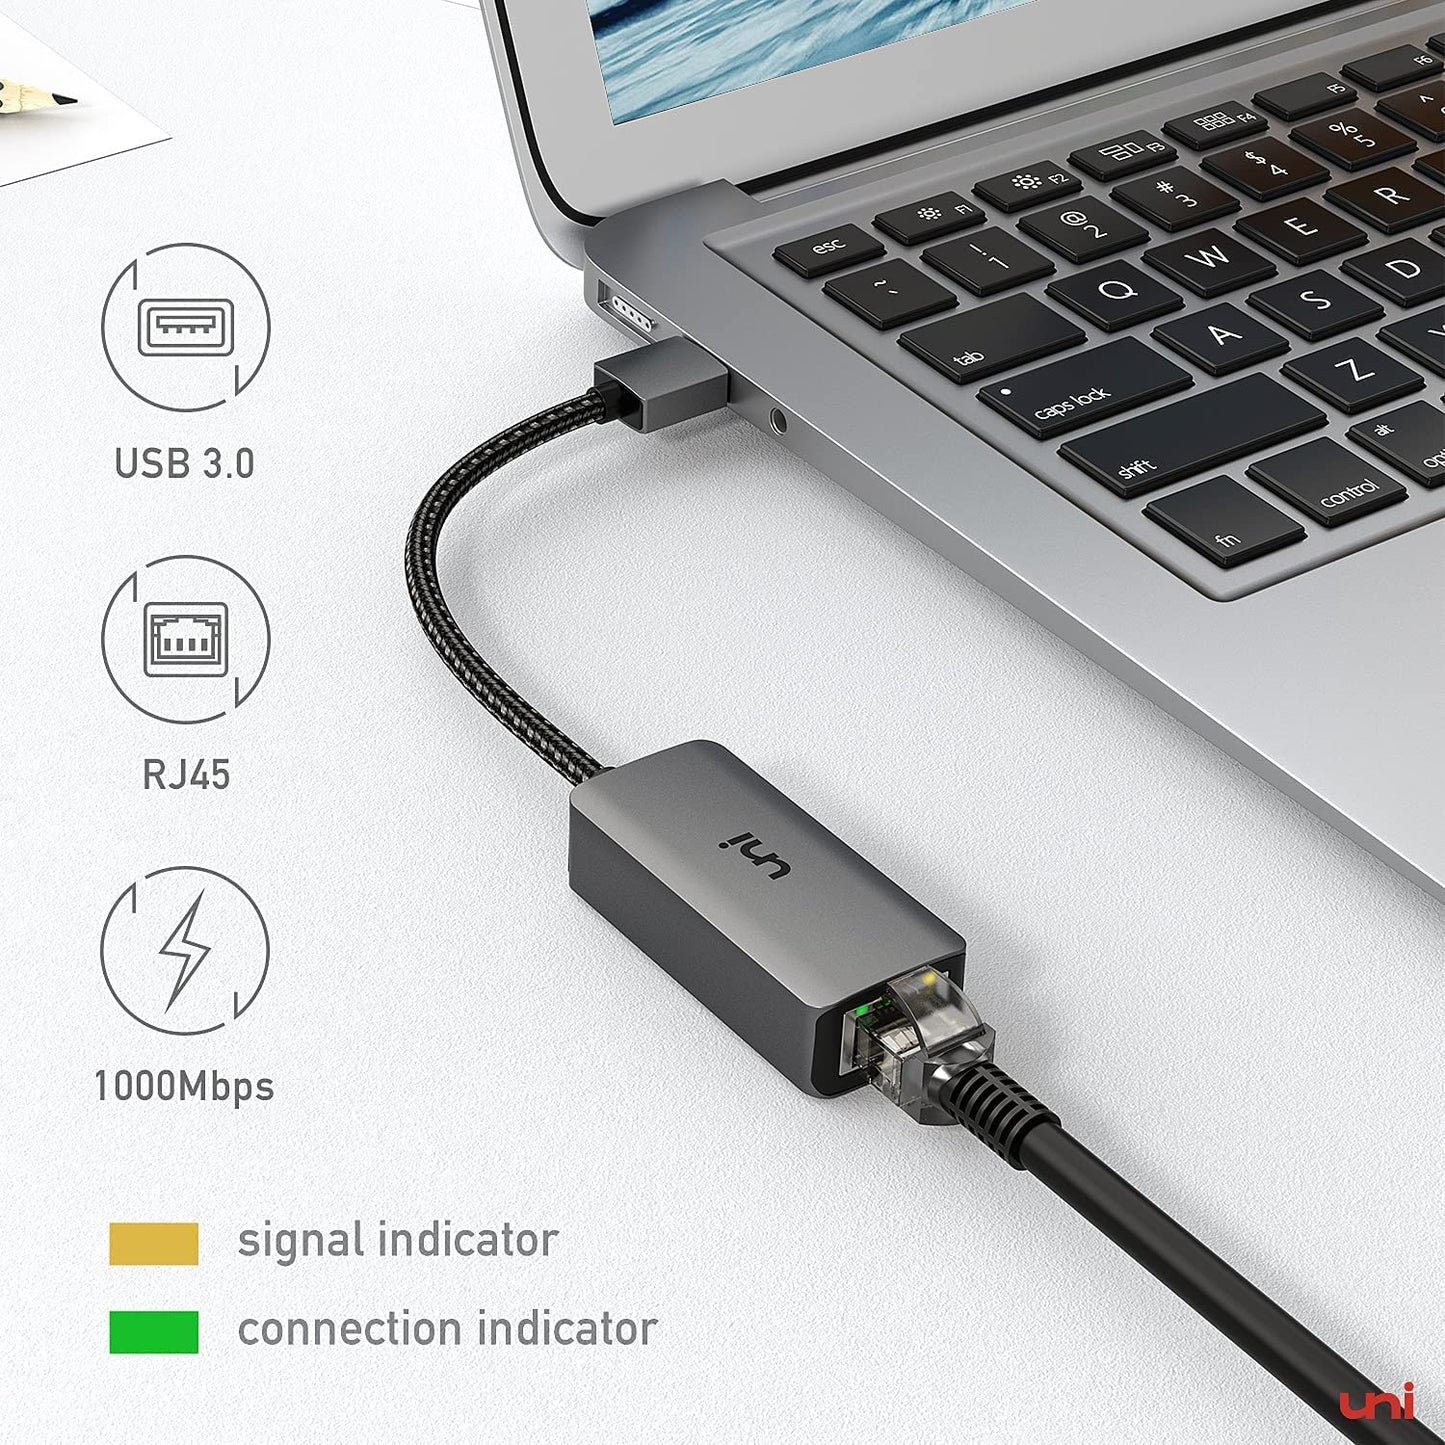 USB to Ethernet Adapter, uni Driver Free USB 3.0 to Gigabit Ethernet LAN Network Adapter, 100/1000 Mbps RJ45 Internet Adapter Compatible with MacBook, Surface, Laptop PC with Windows, XP, Mac/Linux